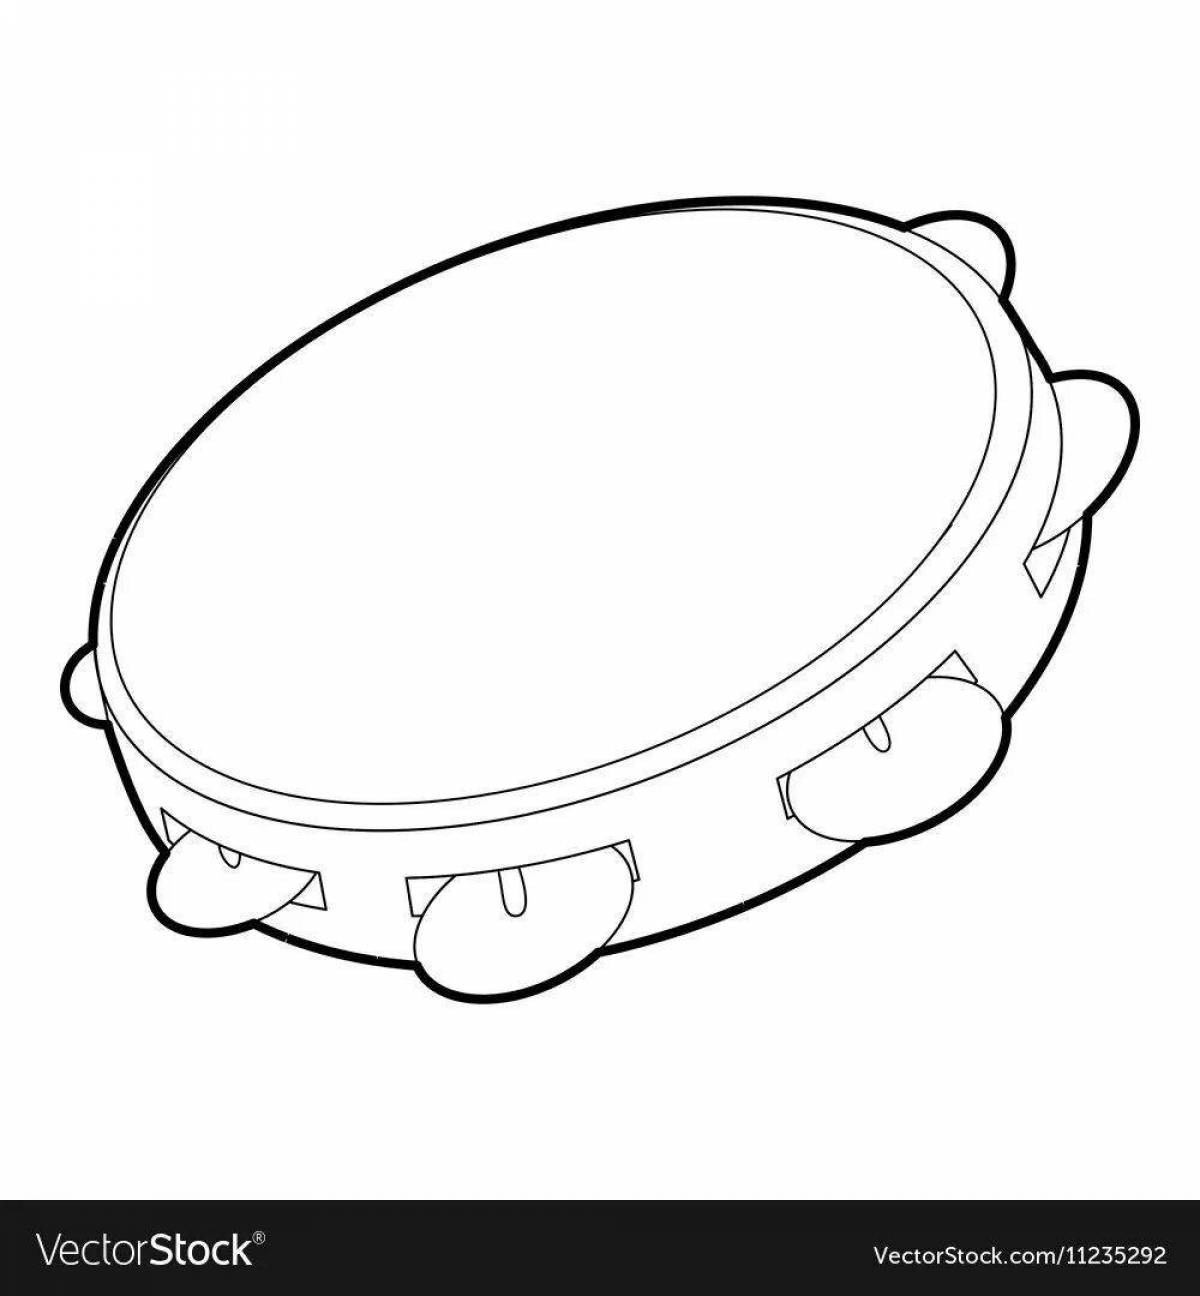 Colorful tambourine coloring book for kids